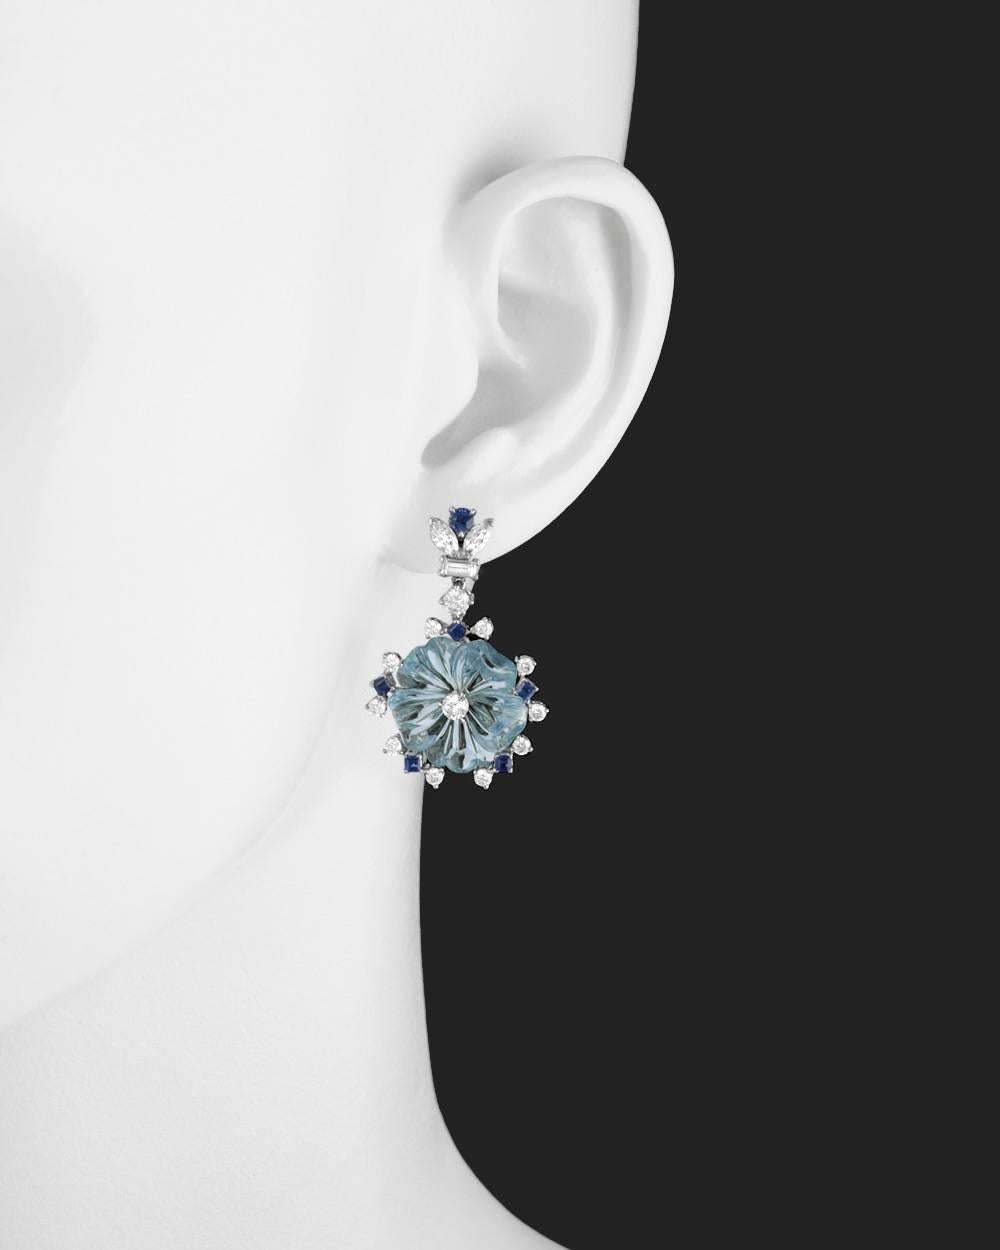 Pendant earrings, showcasing a larger aquamarine carved in the shape of a five-petaled flower centering a round brilliant-cut diamond, the flower motif surrounded by a round diamond and sapphire border, with an elegant round, marquise and